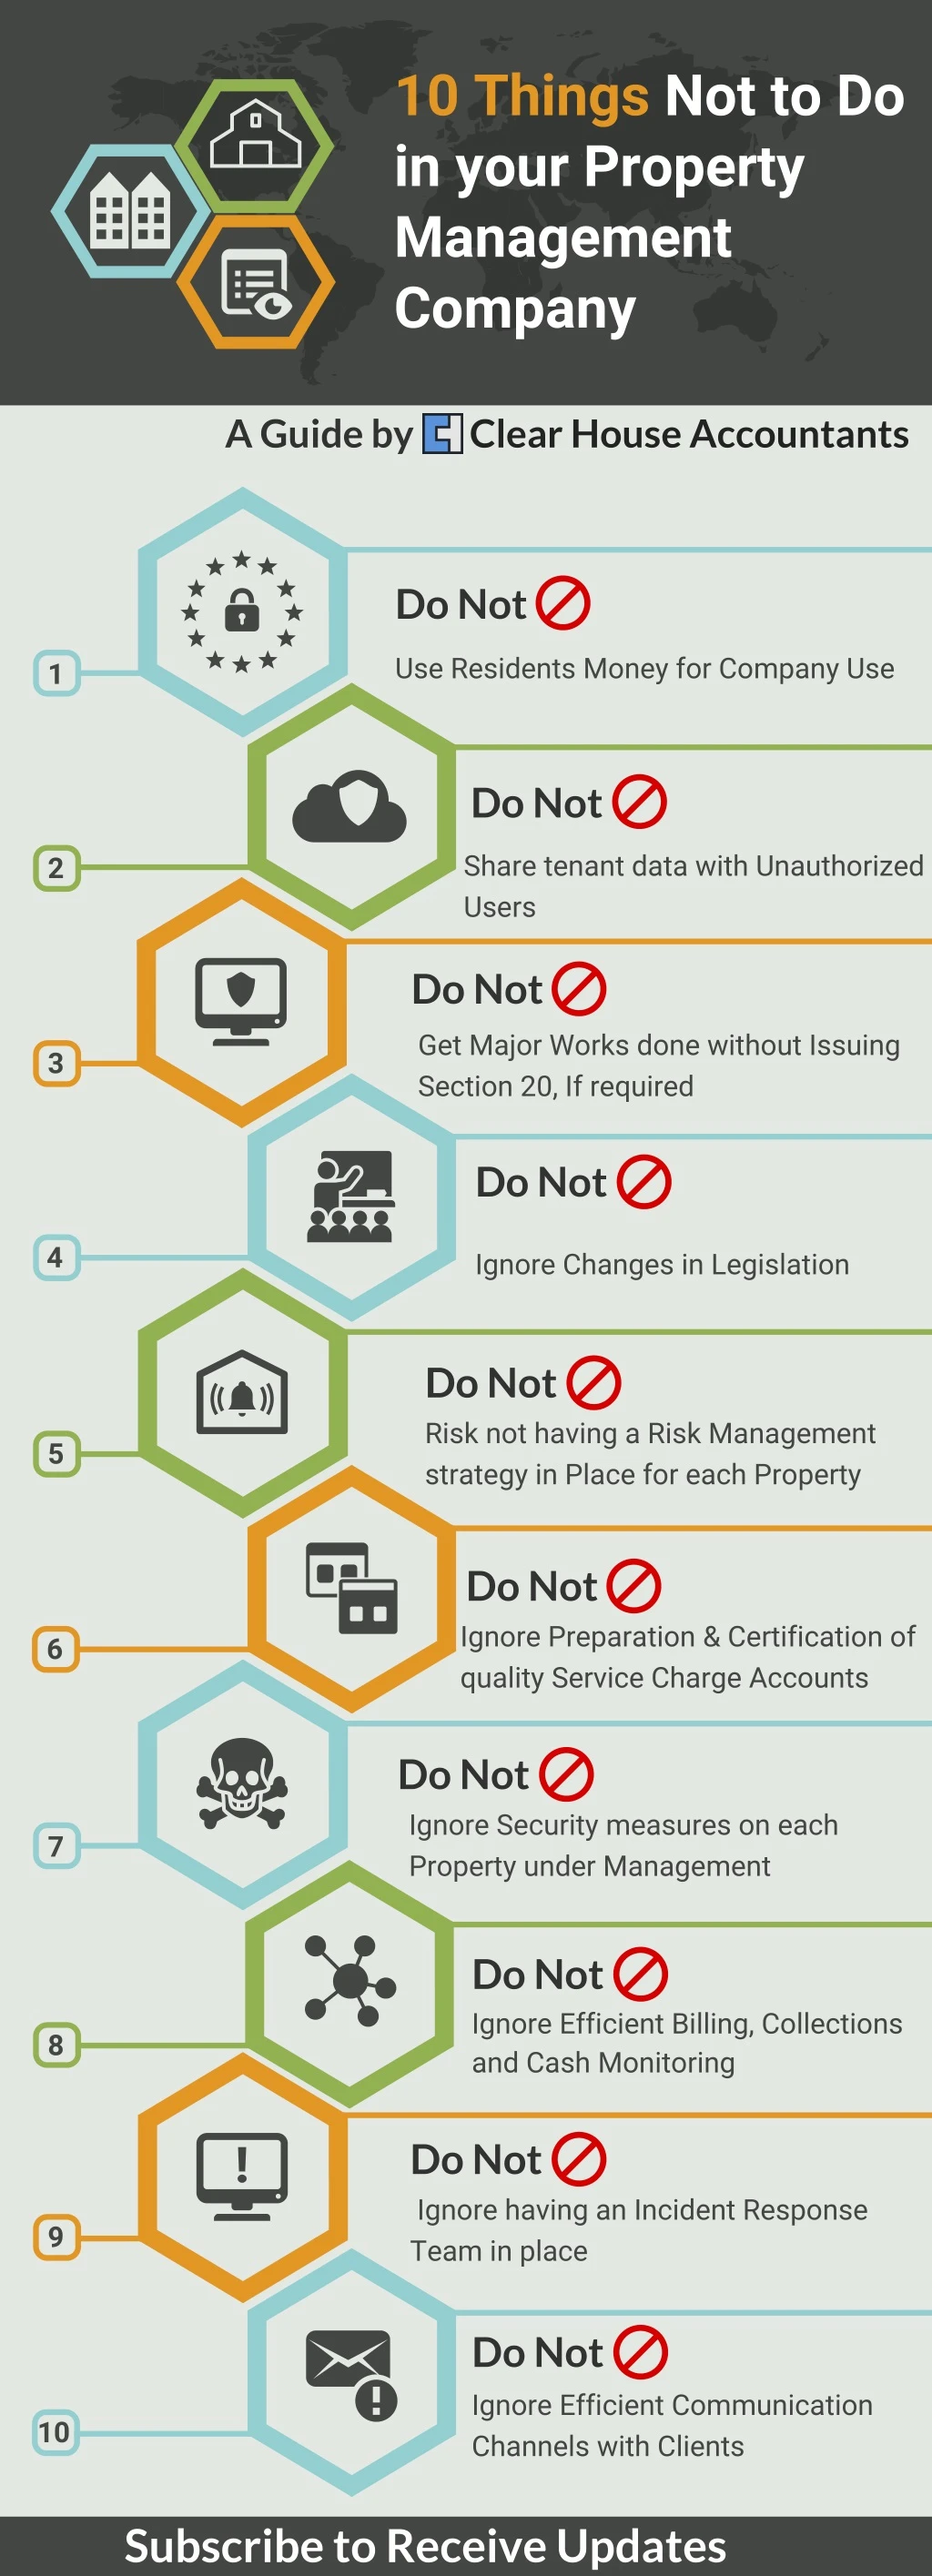 10 things not to do in your property management